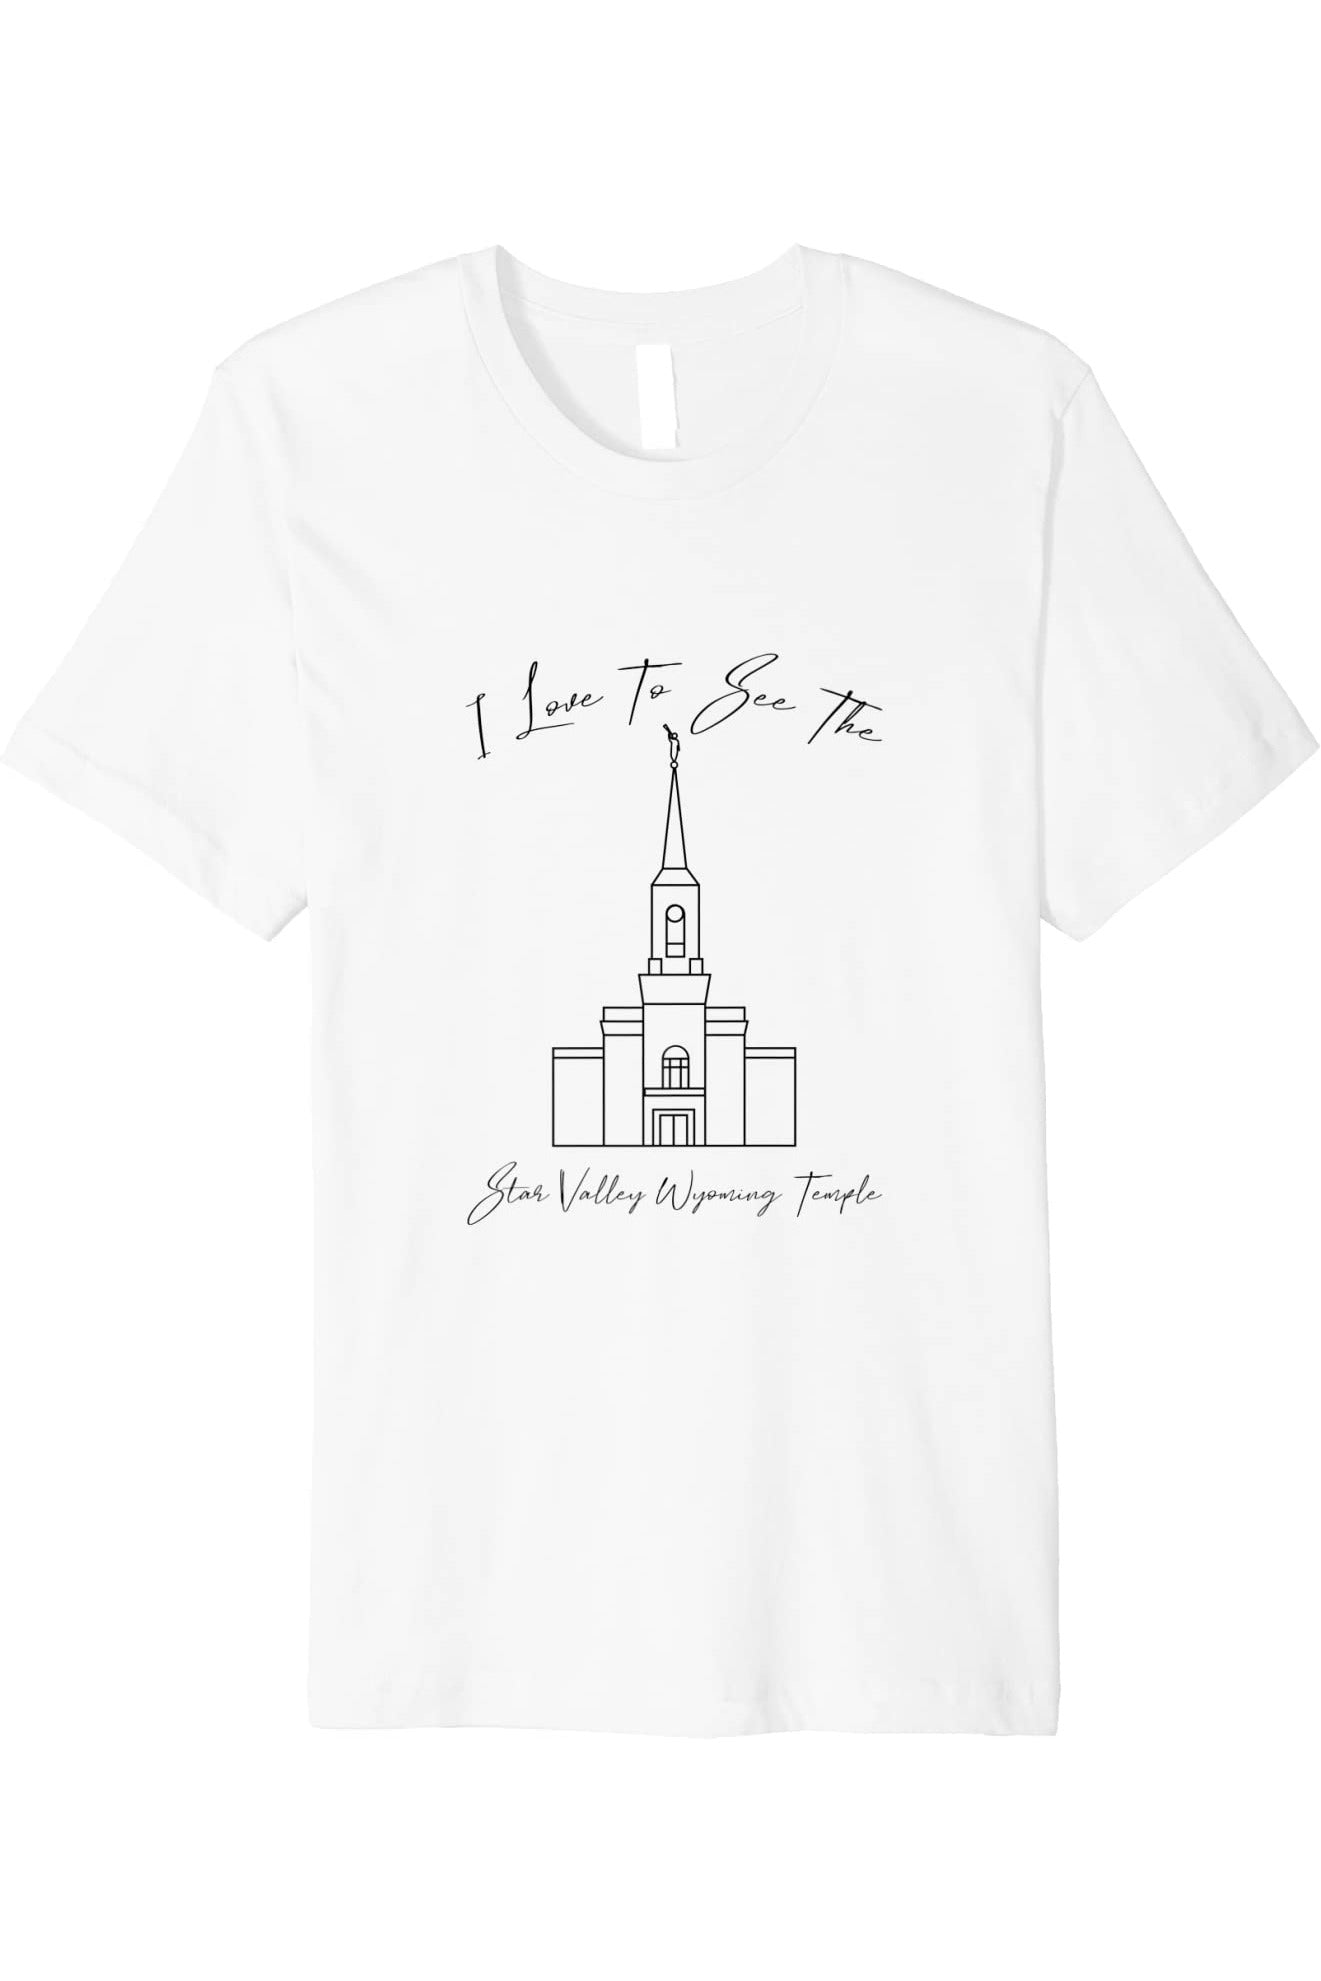 Star Valley Wyoming Temple T-Shirt - Premium - Calligraphy Style (English) US